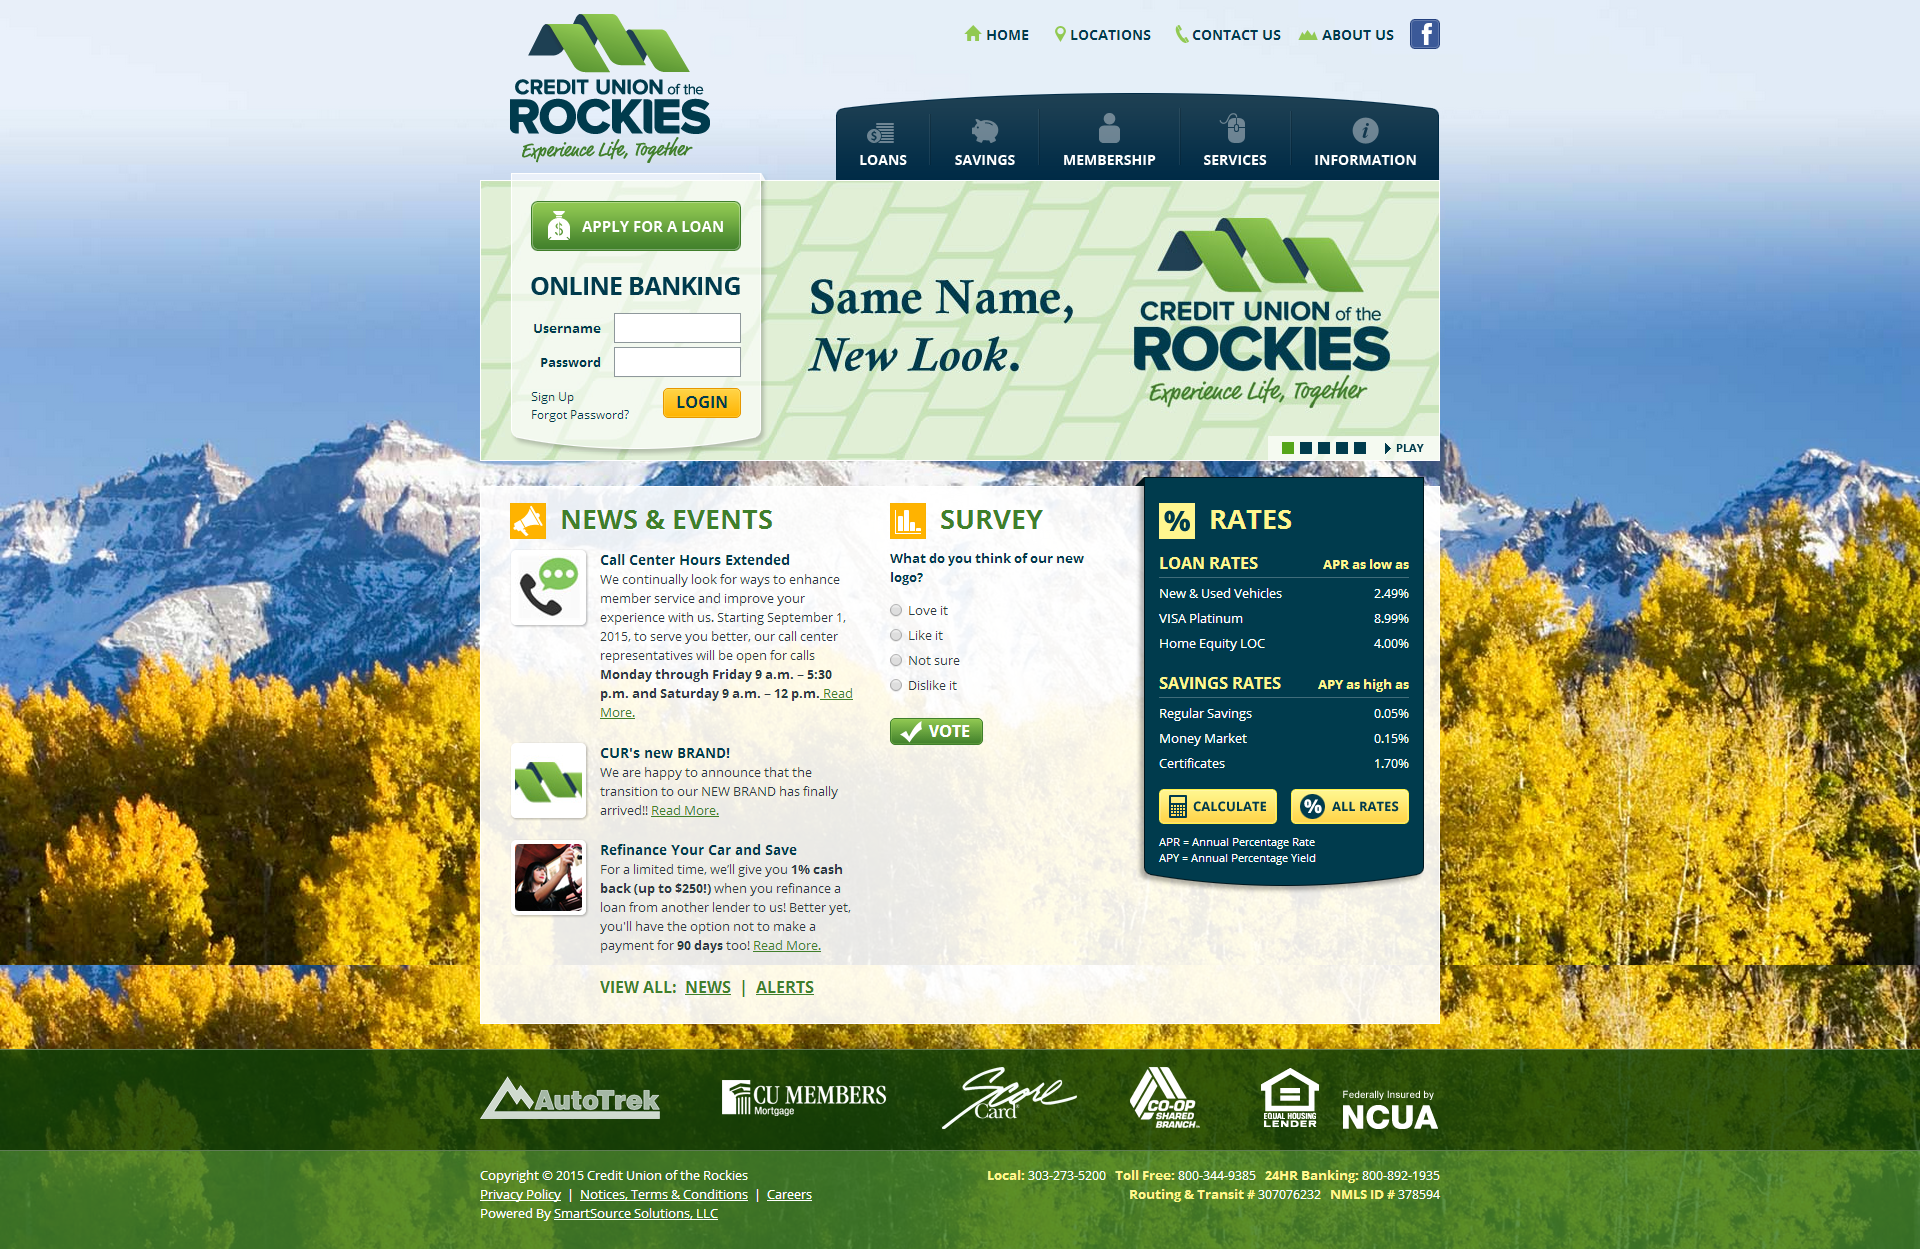  Red Thread Creative provided a customer survey and follow-up branding services for Credit Union of the Rockies. 